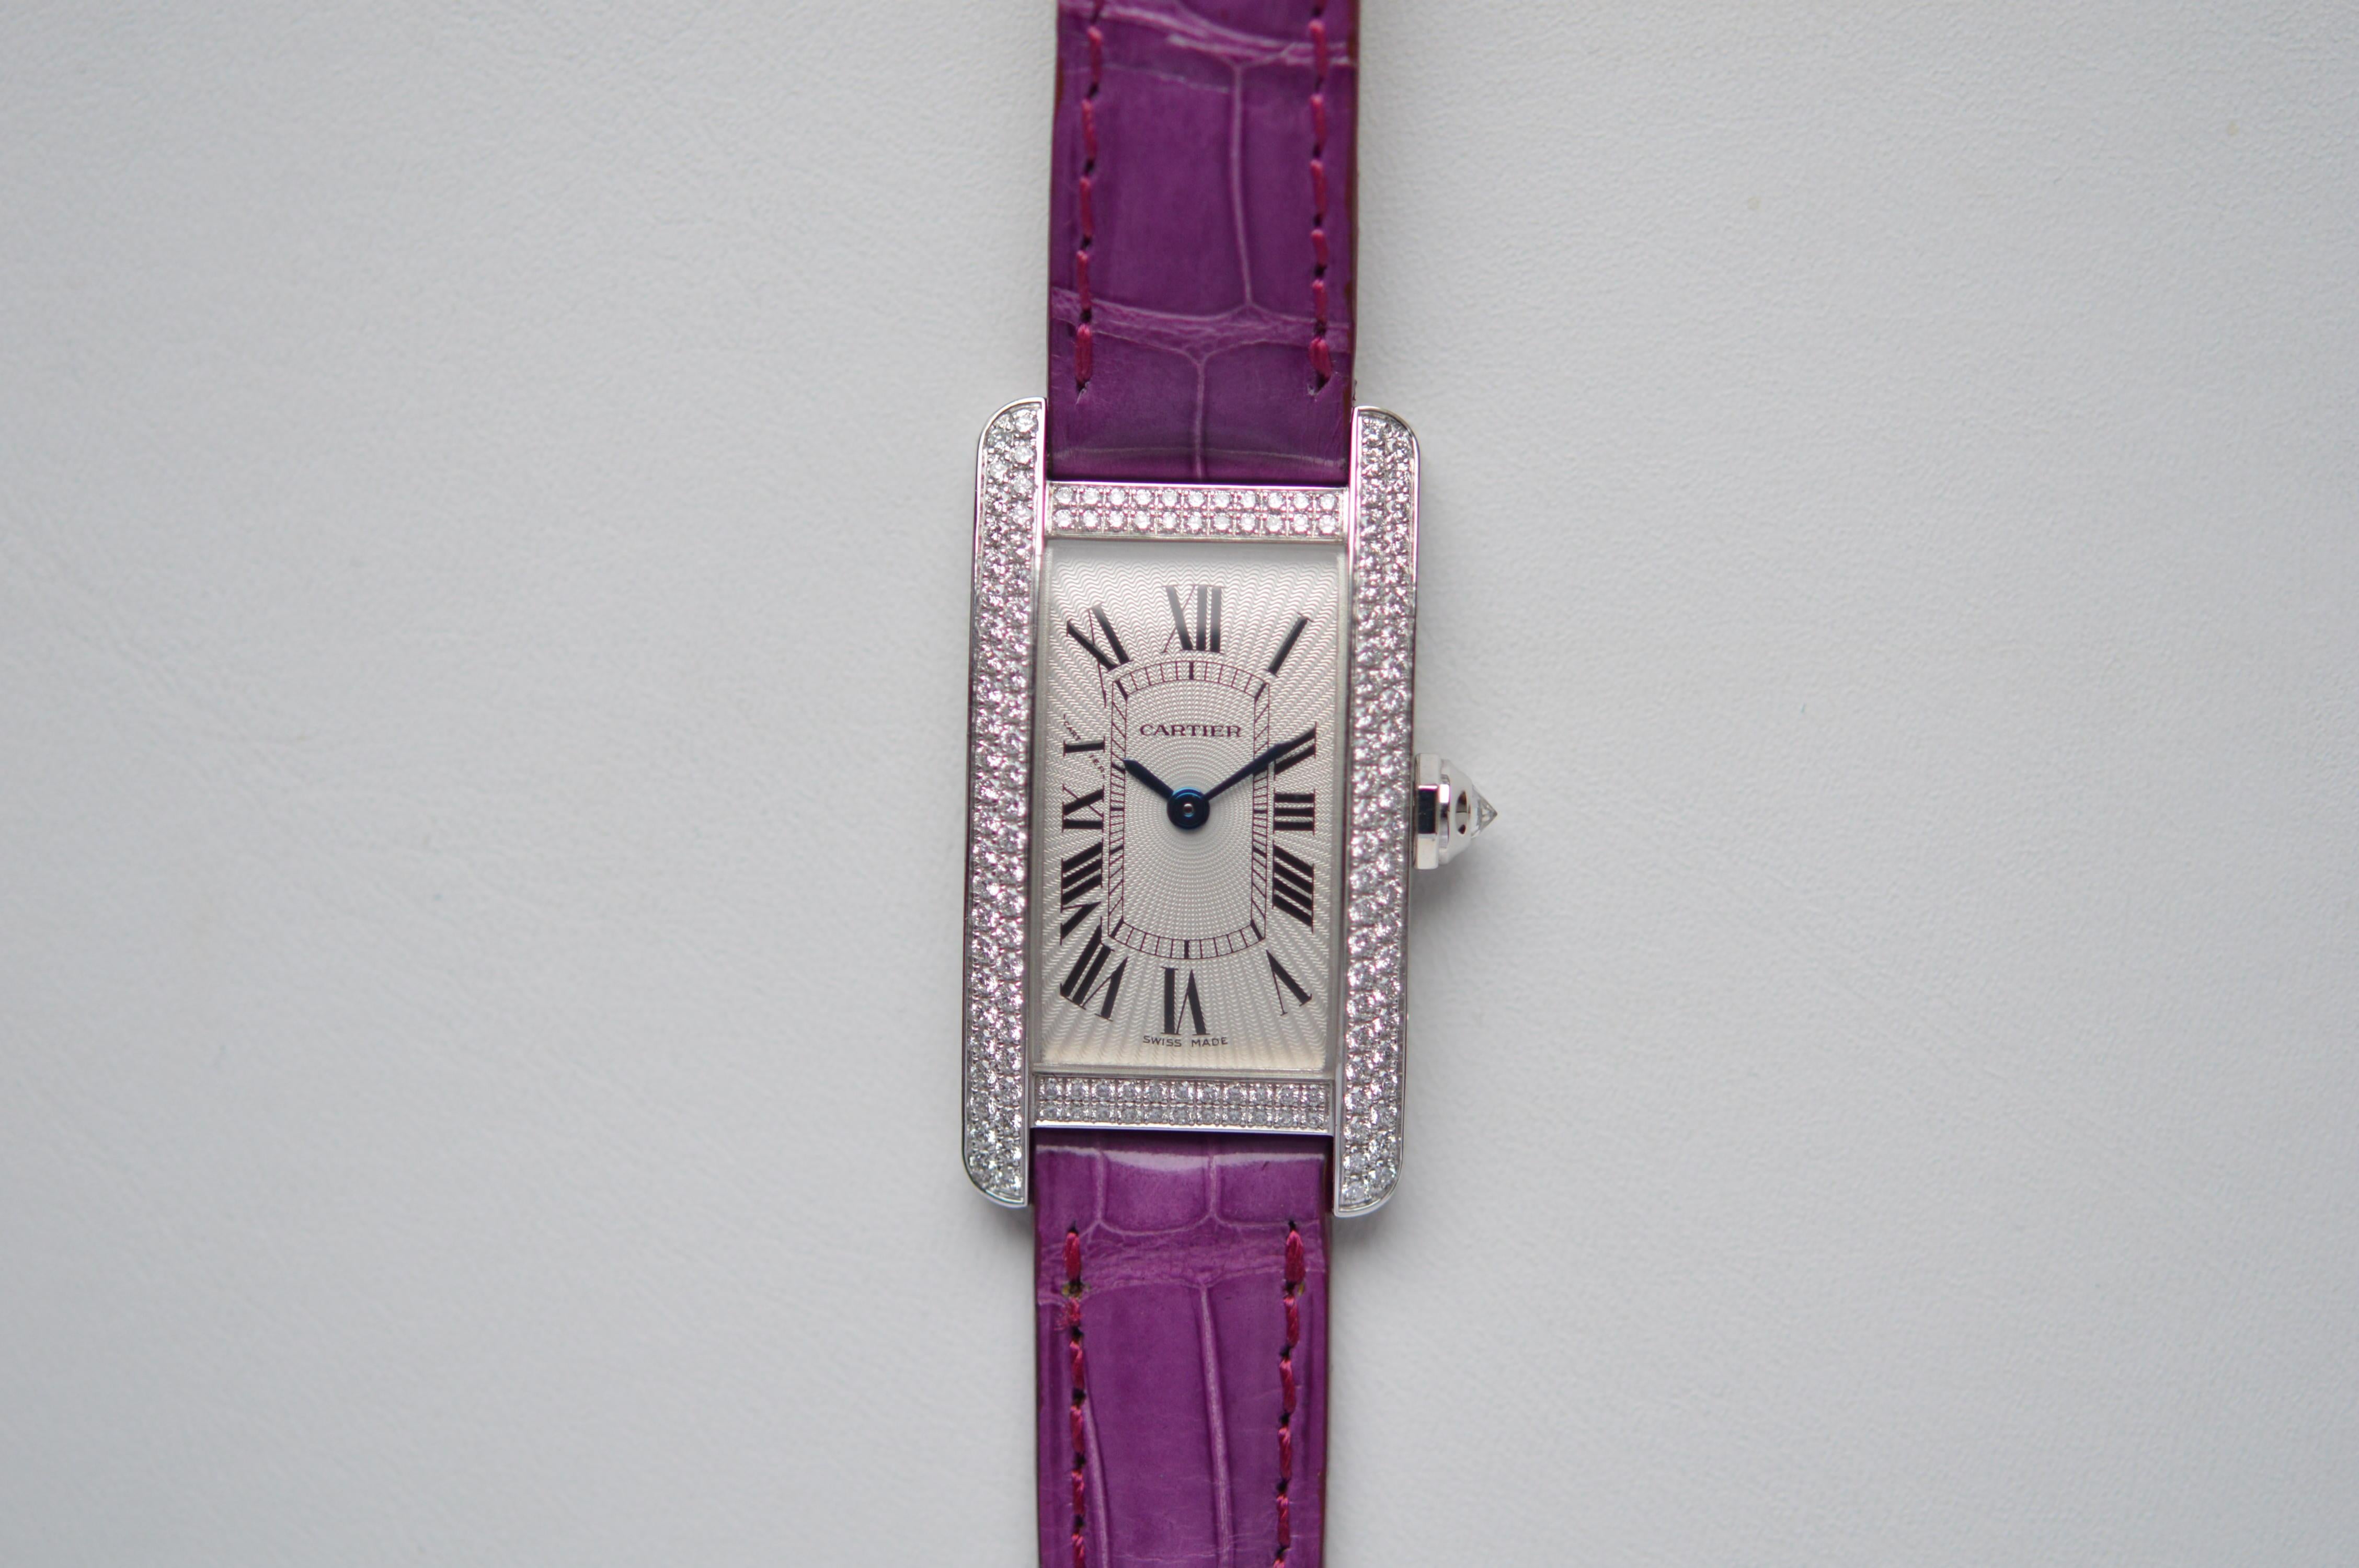 Cartier Tank Americaine
Reference n° WB704431
Small Model (SM) Size
18K White Gold
28mm X 19mm Size
Diamond Bezel
Original Cartier Diamond Setting
143 Round Diamond for a total of 0.94 carats
Diamond Crown
Purple Leather Strap
Silver White